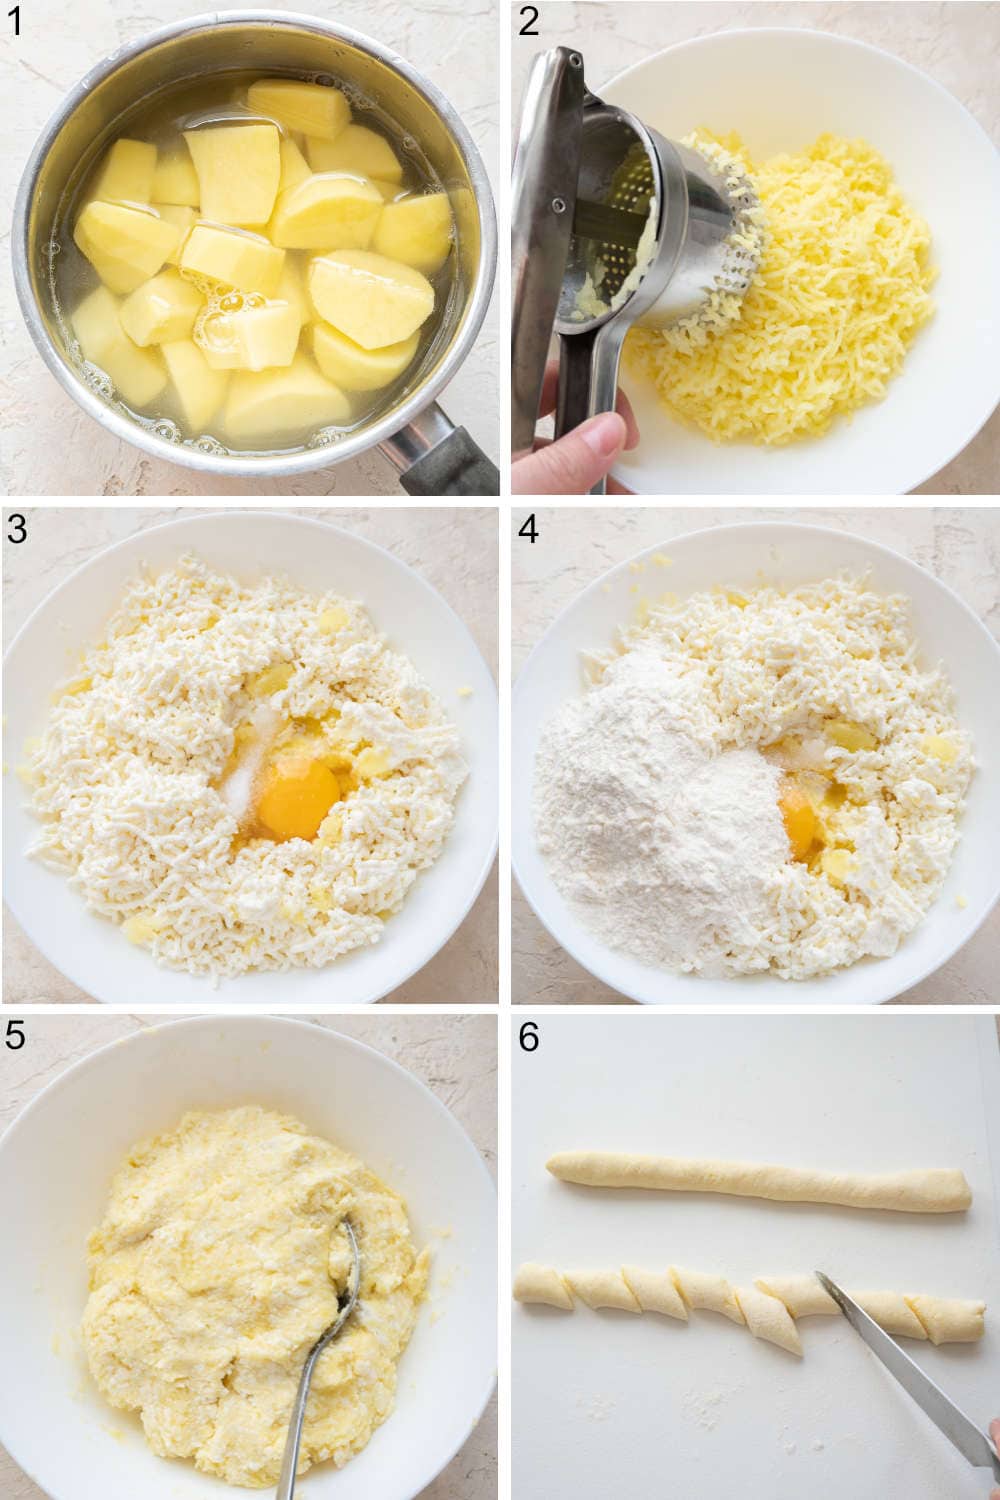 A collage of 6 photos showing how to make potato and cheese leniwe step by step.